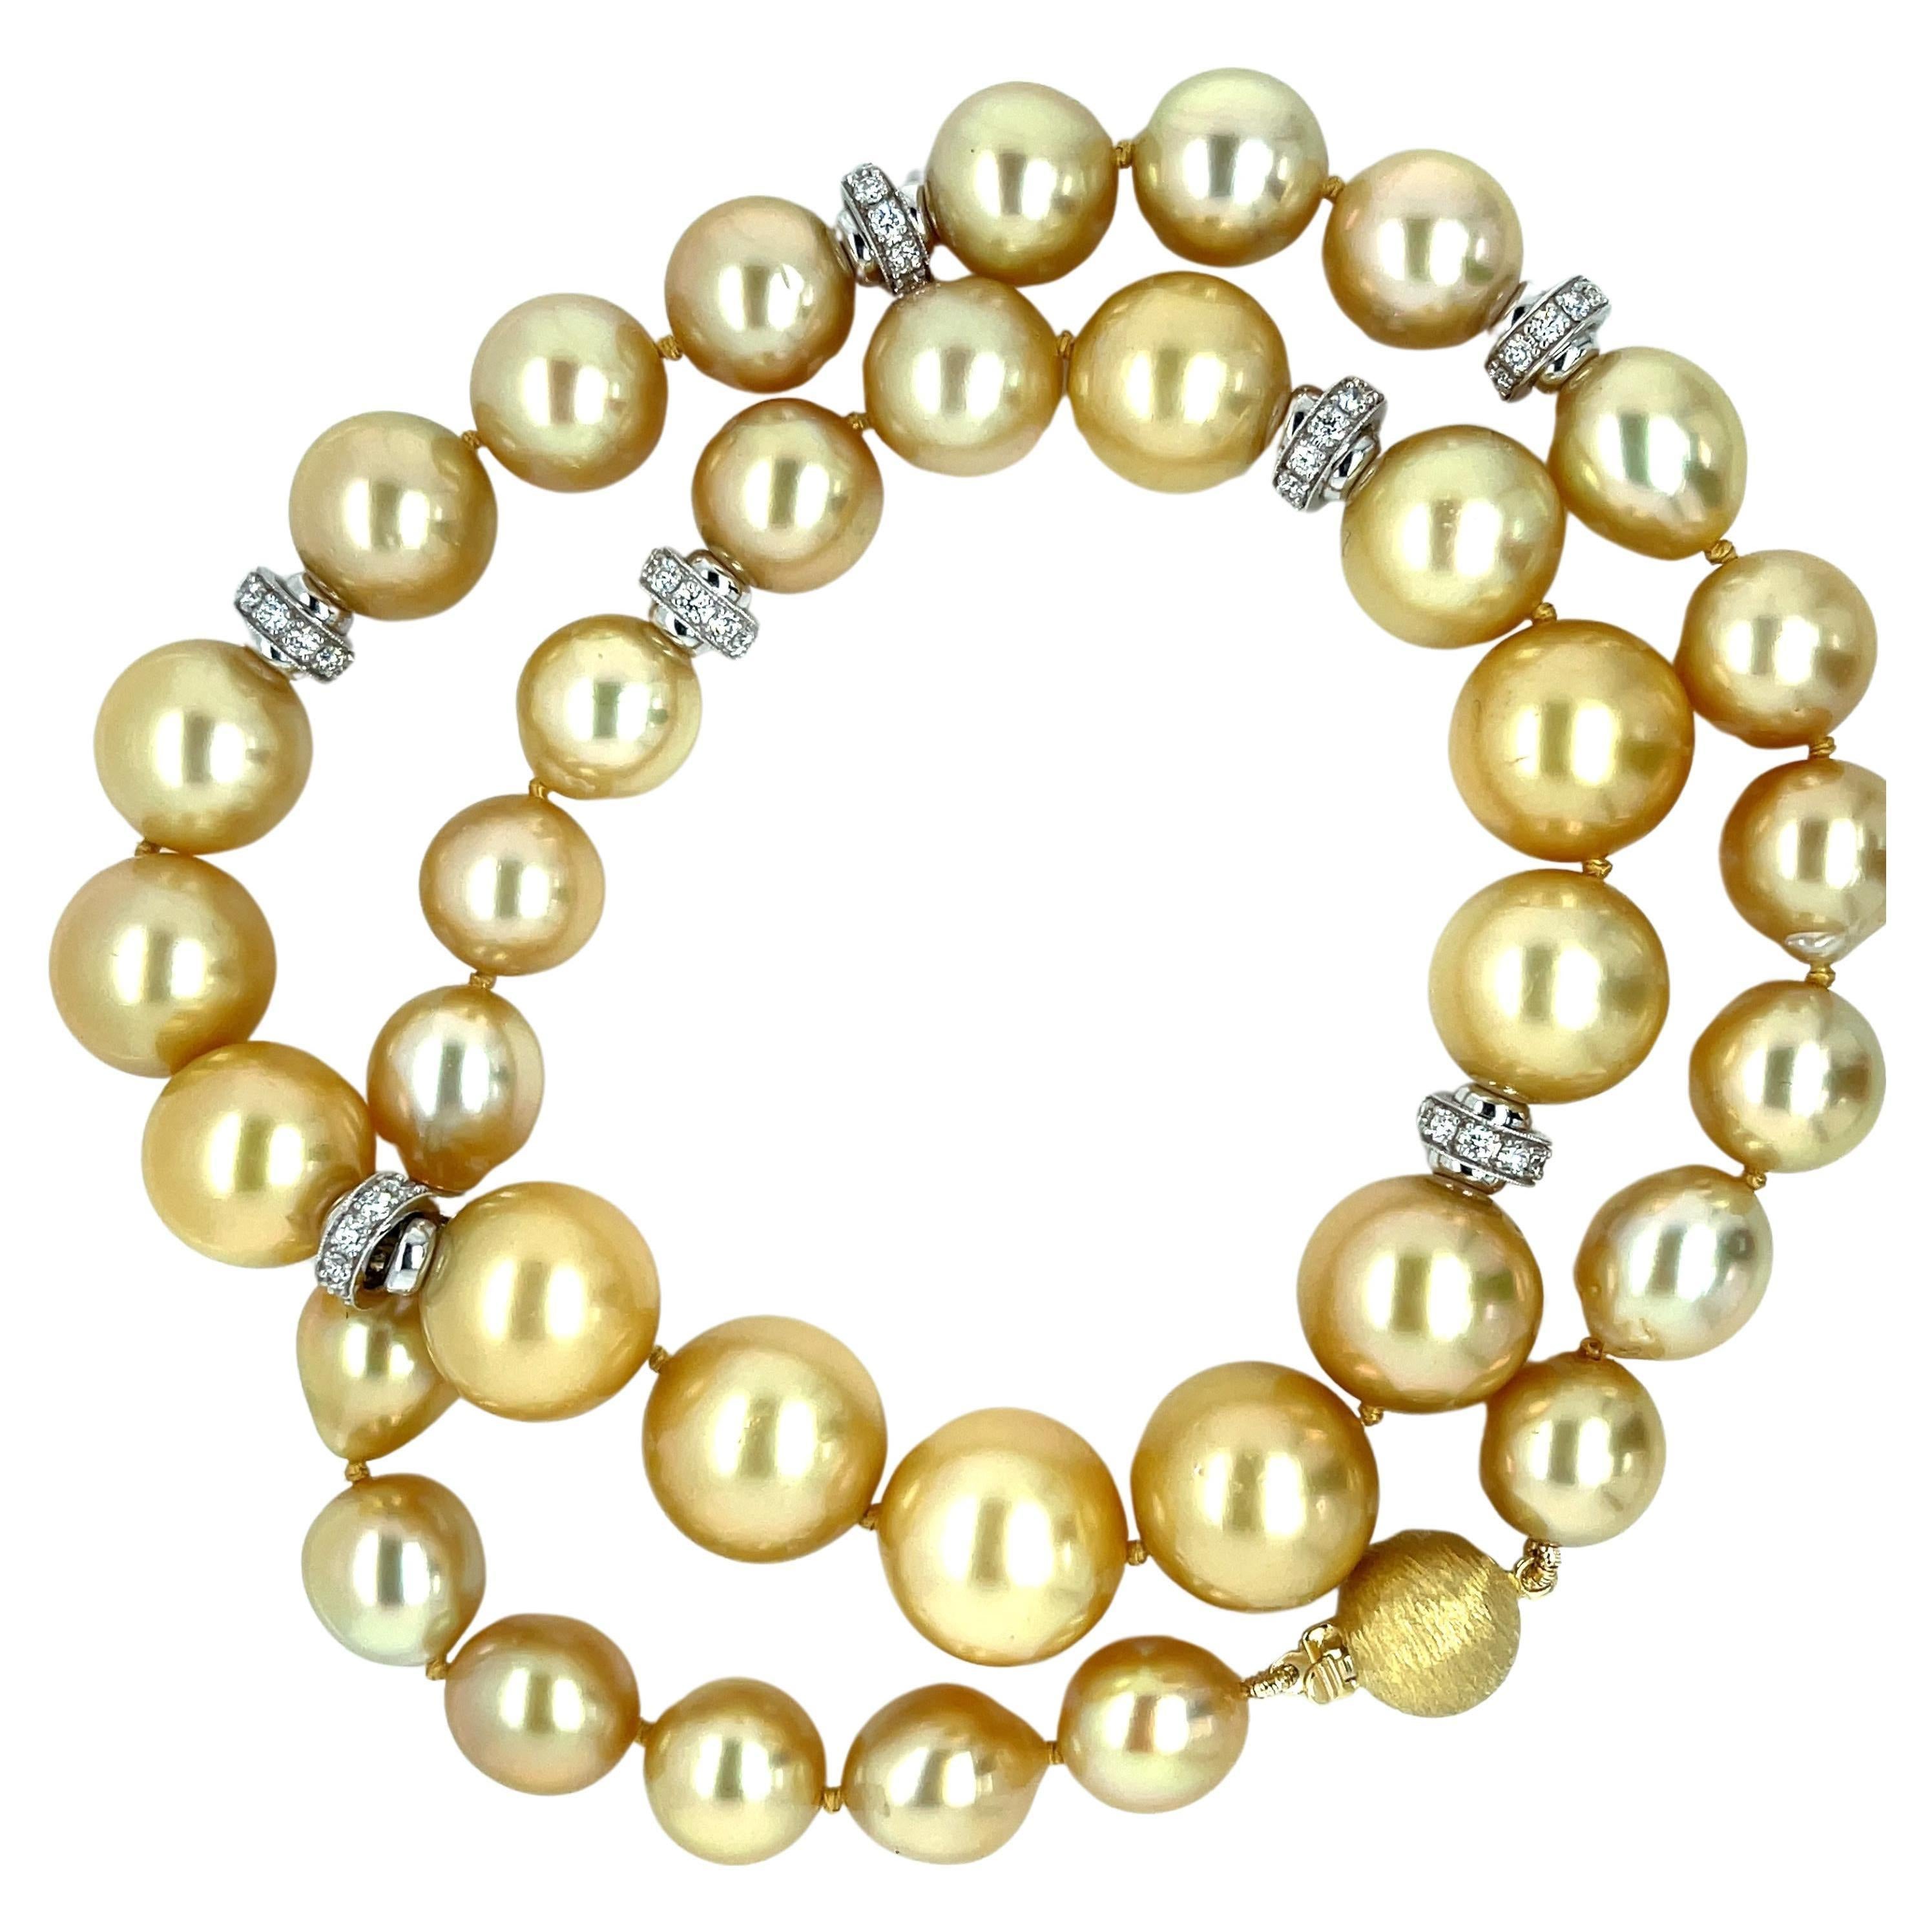 Golden South Sea Pearl Necklace, 18 Inches with 14k and 18k Accents, 9.6 - 13mm